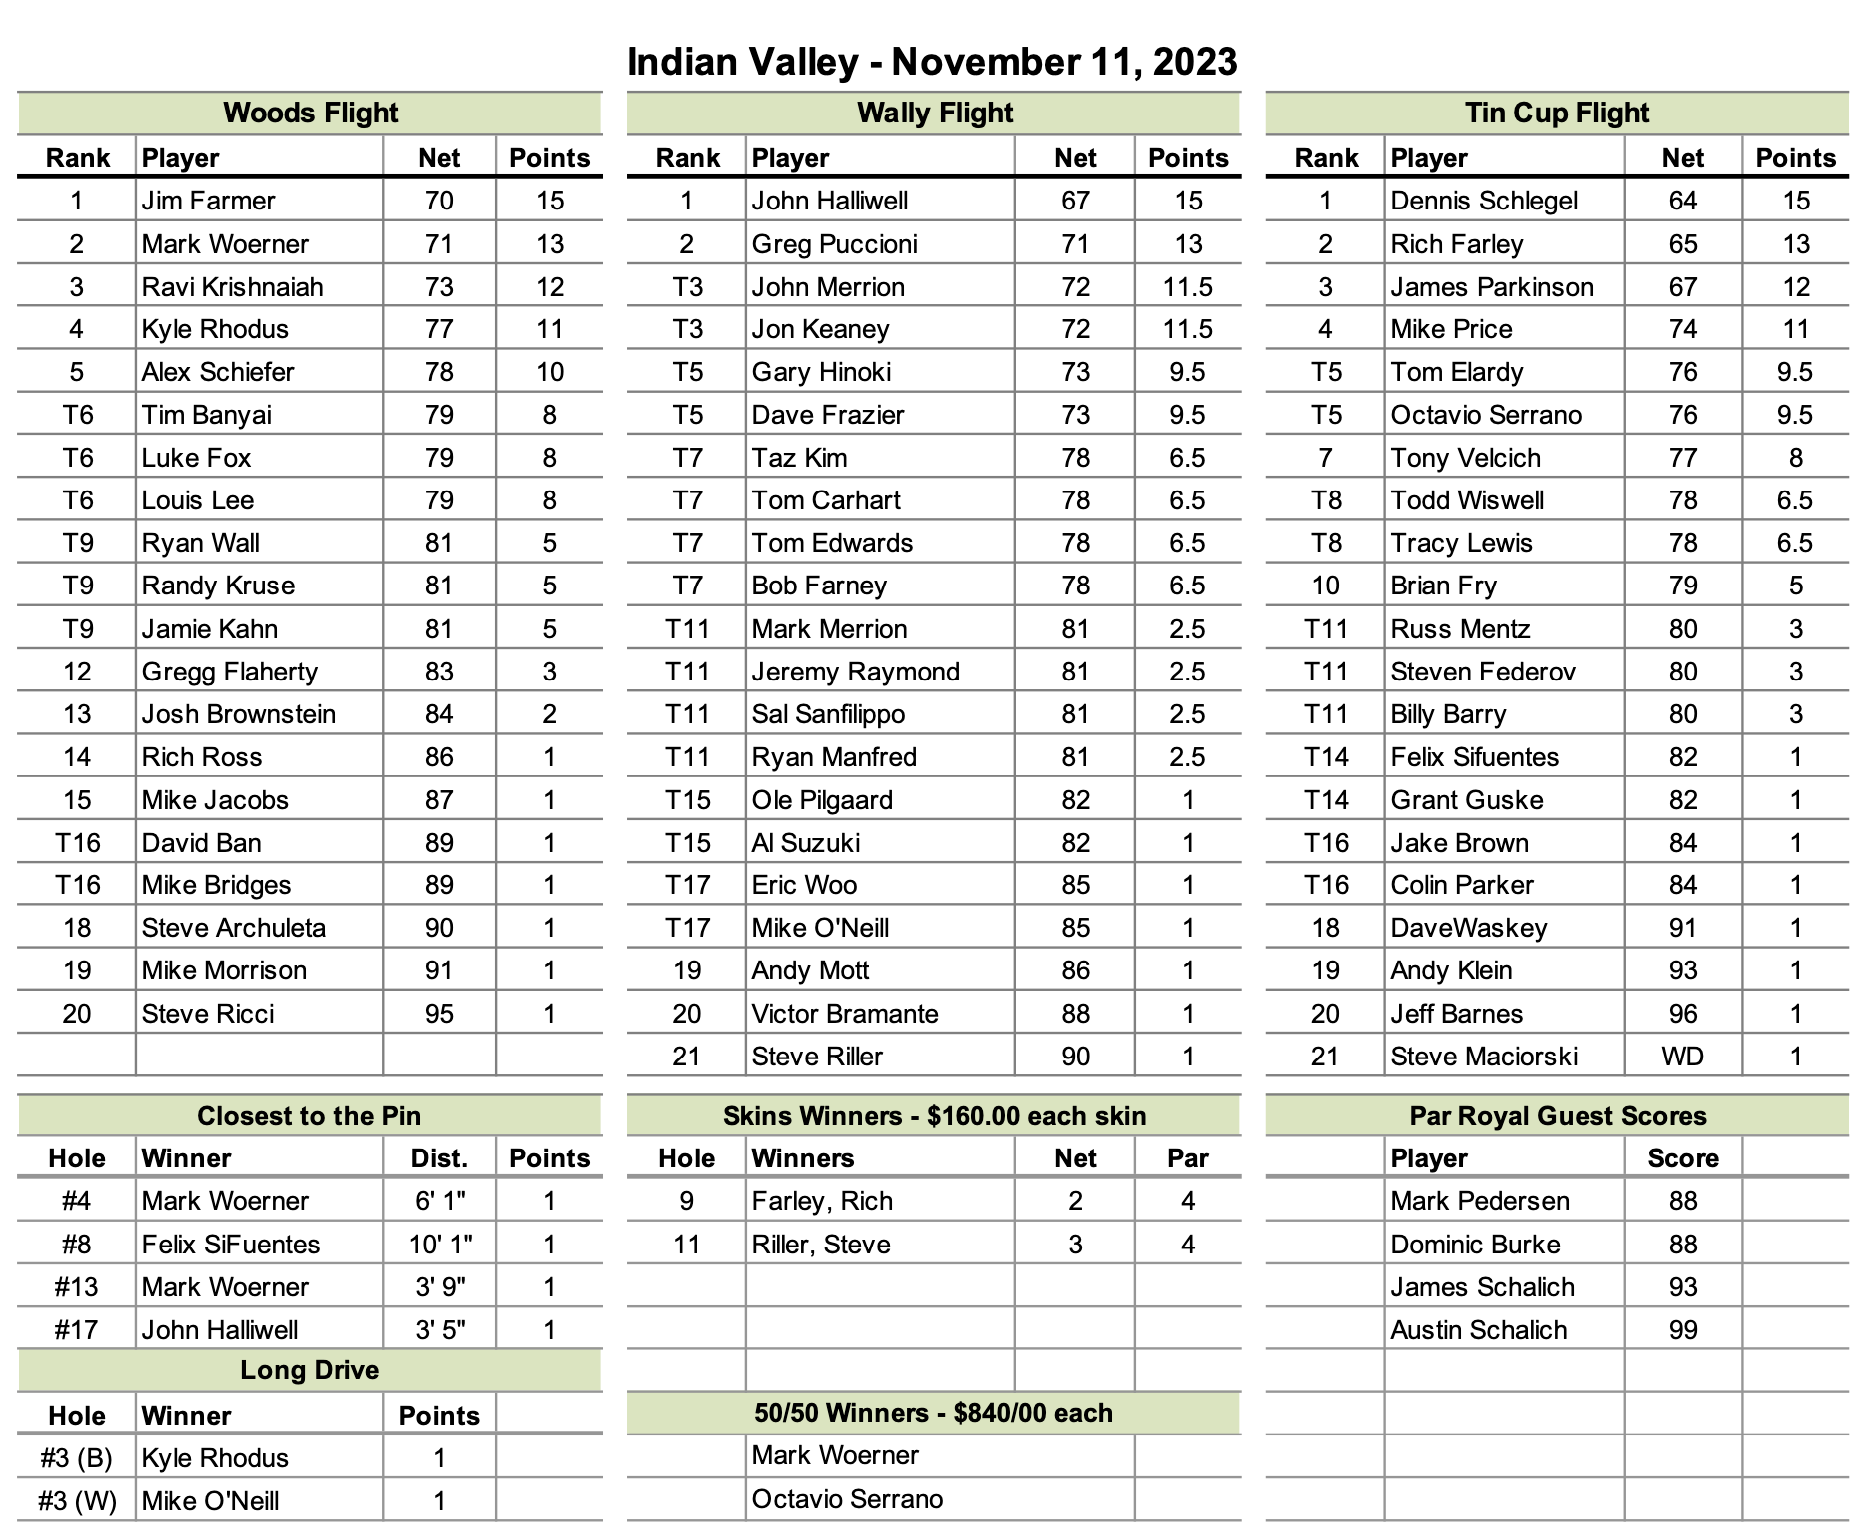 Indian Valley Results